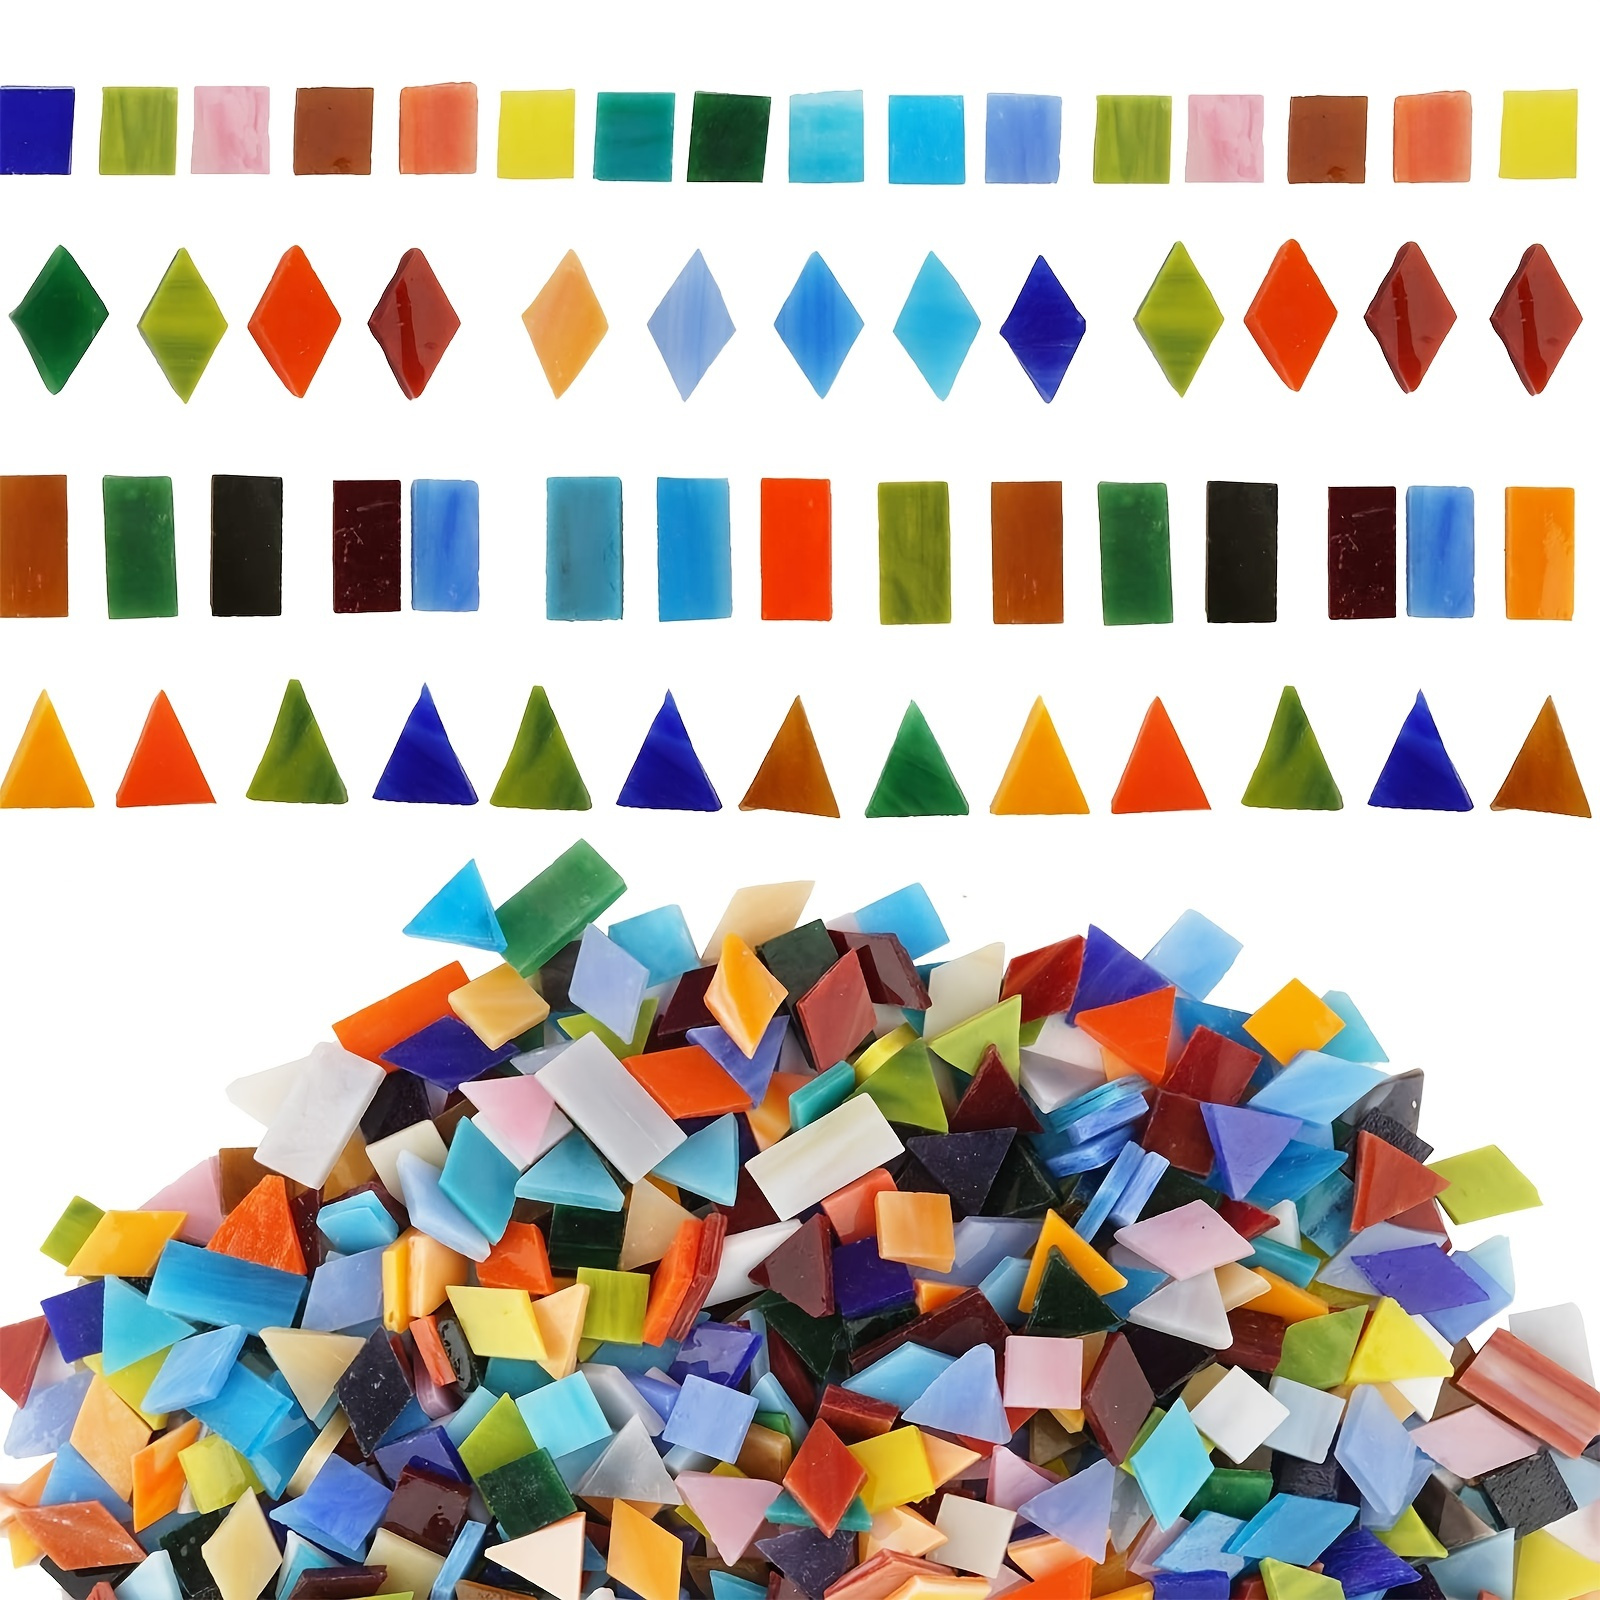 

620pcs Mixed Shapes Glass Mosaic Tiles For Crafts, Colorful Stained Glass Pieces For Mosaic Projects